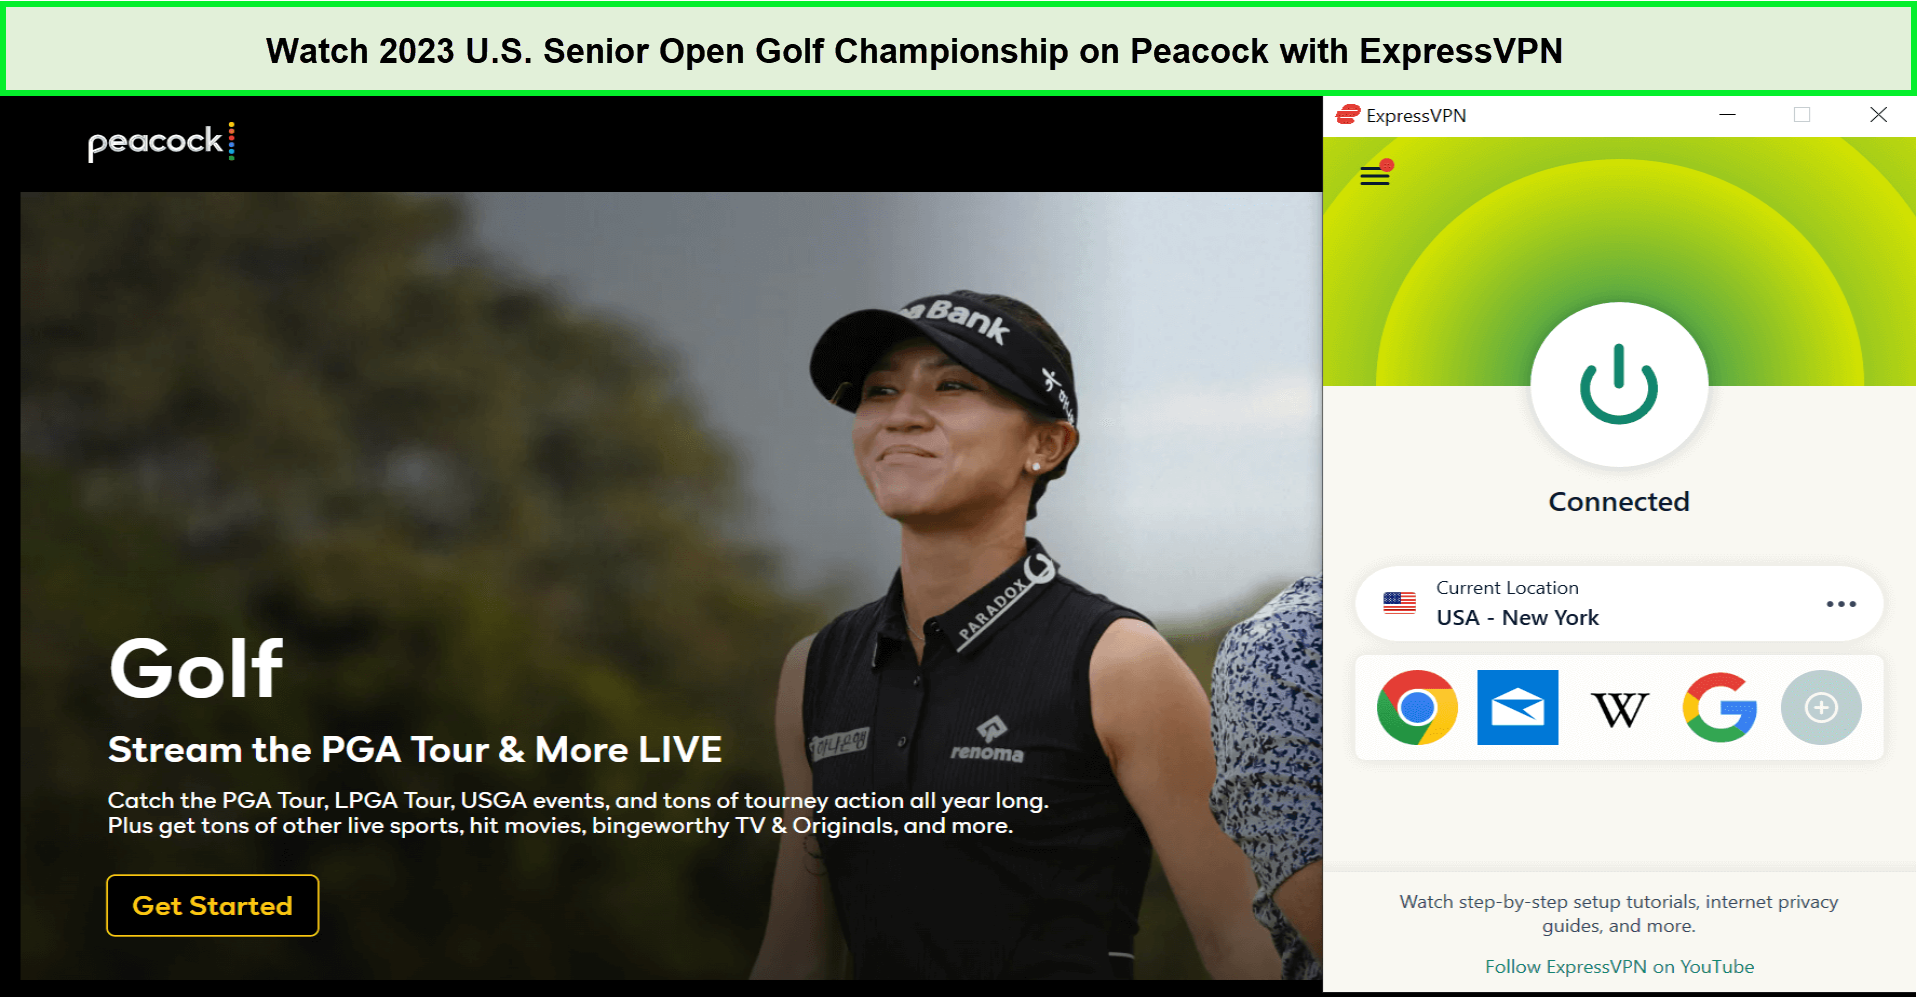 Watch-2023-U.S.-Senior-Open-Golf-Championship-in-Spain-on-Peacock-with-ExpressVPN